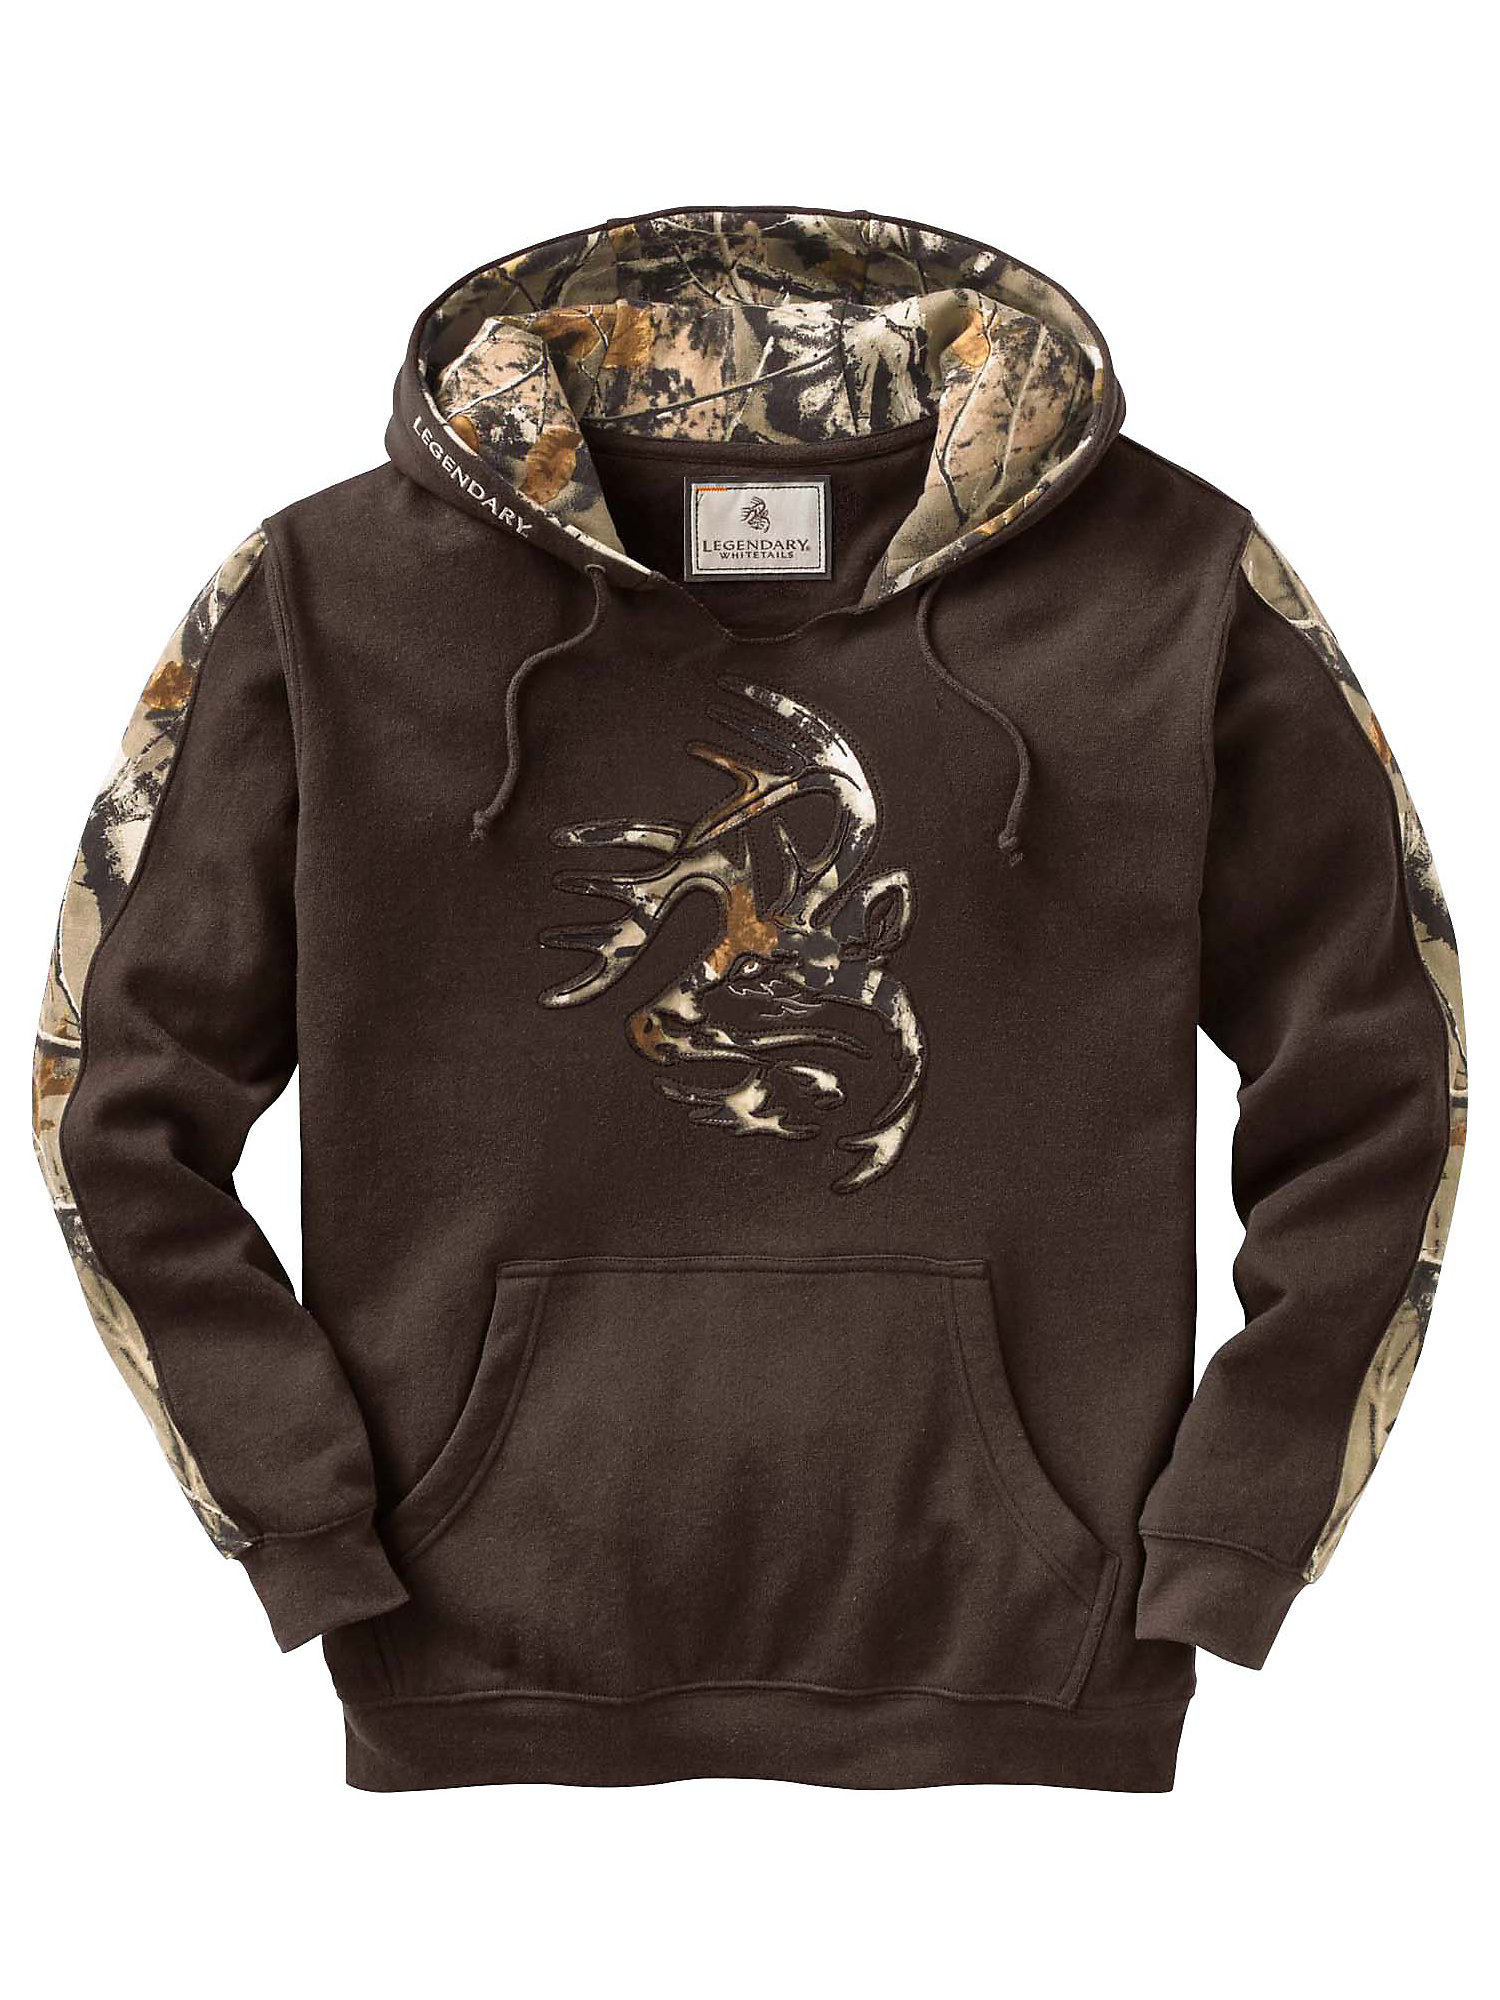 Legendary Whitetails Men's Camo Outfitter Hoodie | eBay